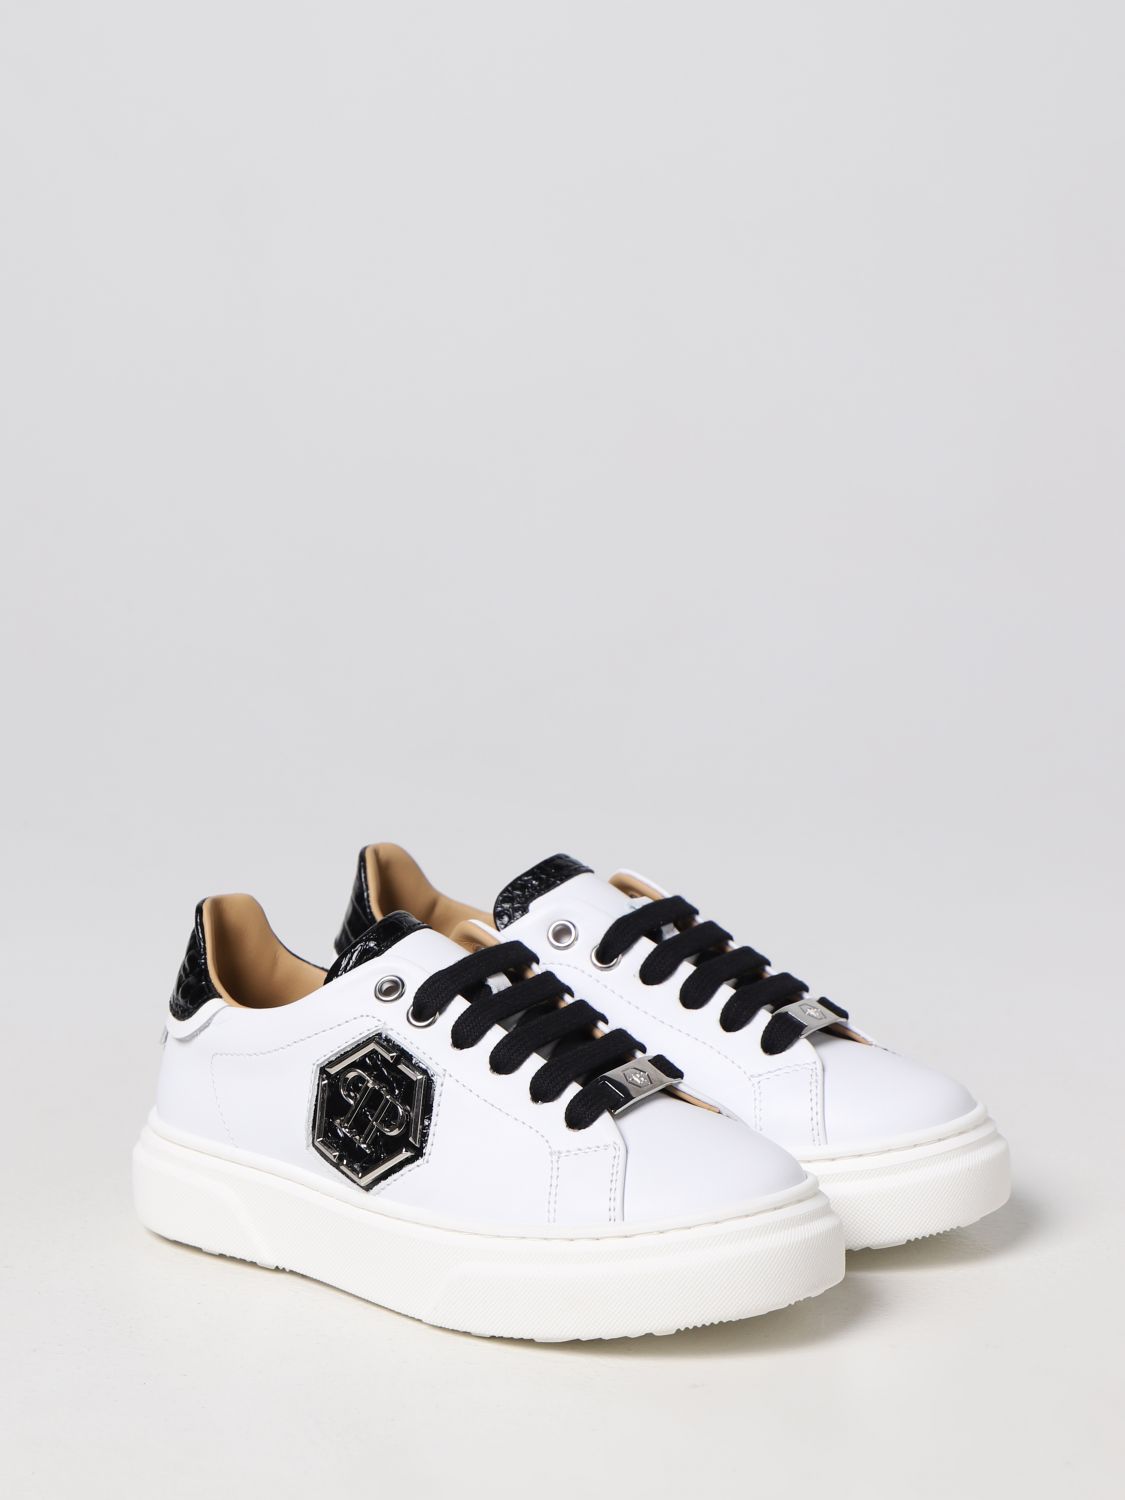 imply Guarantee Possession PHILIPP PLEIN: shoes for girls - White | Philipp Plein shoes 72867 online  on GIGLIO.COM